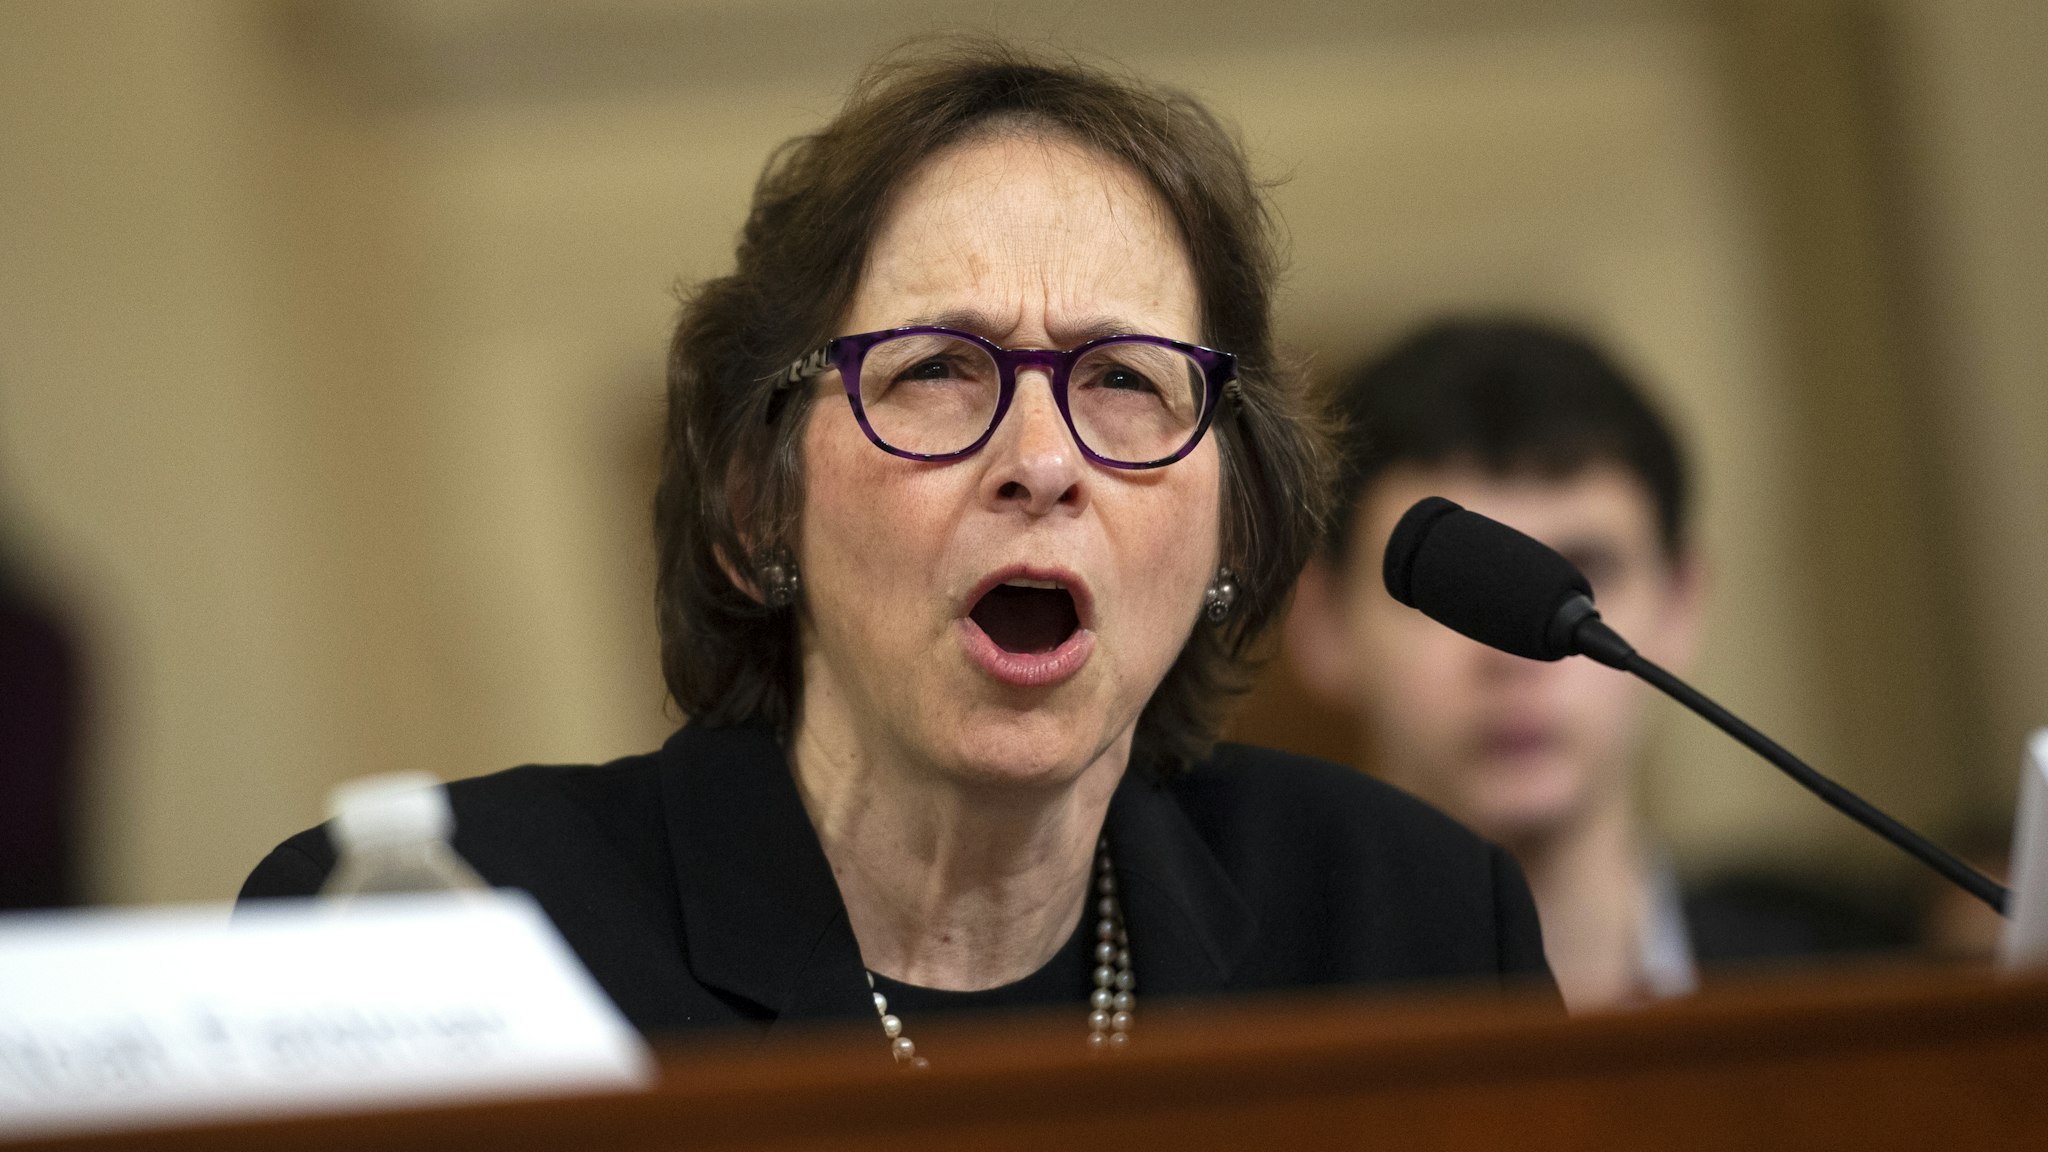 Stanford Law School professor Pamela Karlan testifies during the House Judiciary Committee hearing on the impeachment inquiry of President Trump in Longworth Building on Wednesday Dec. 4, 2019.